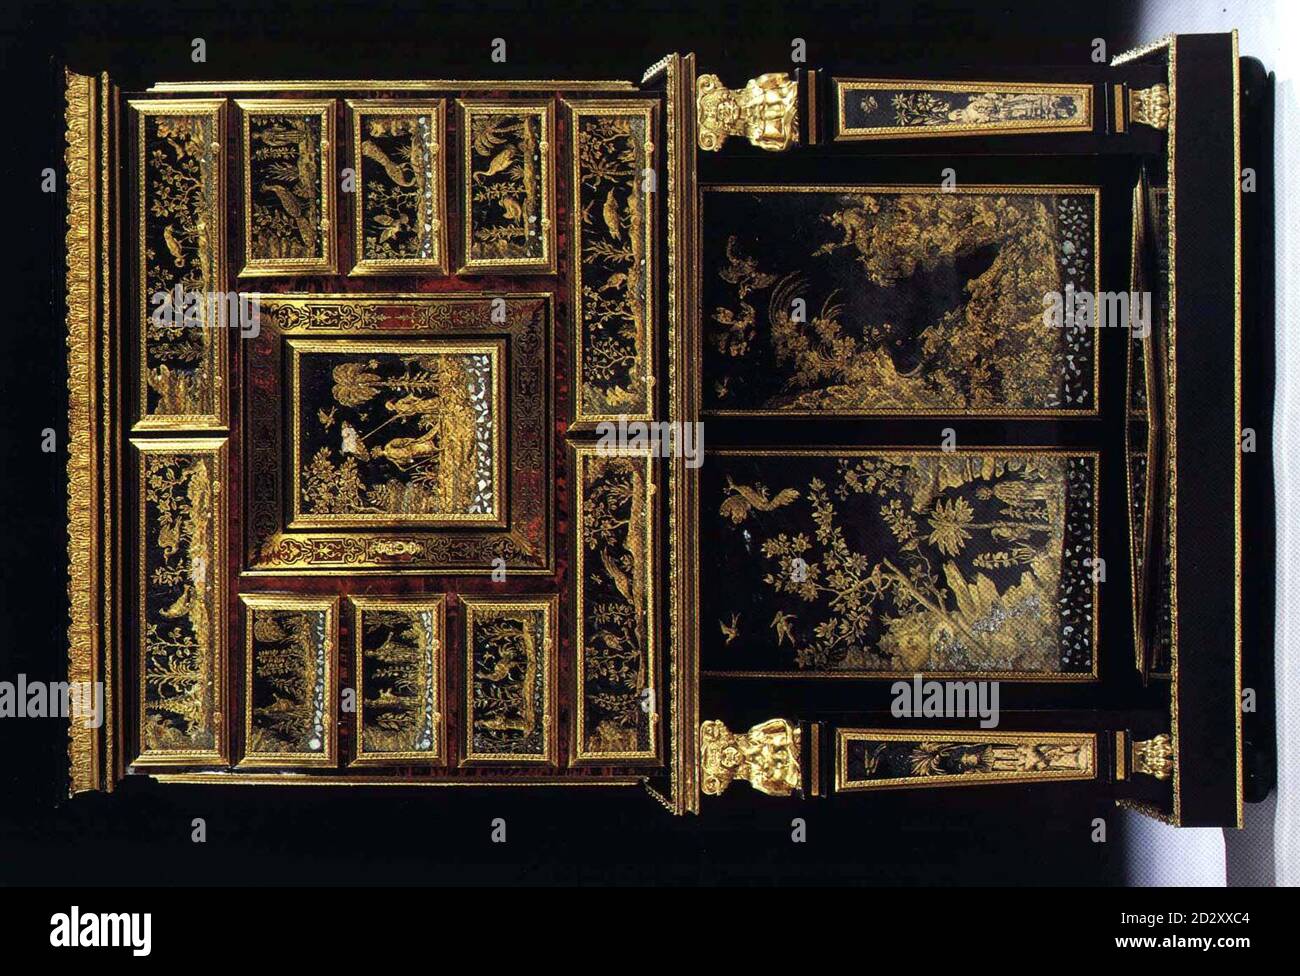 An impressive Louis XIV chinoiserie cabinet, reputedly given to Mademoiselle  Coco Chanel by the 2nd Duke of Westminster, which sold at Sotheby's London  today (13.06.97) in a sale of Important French and